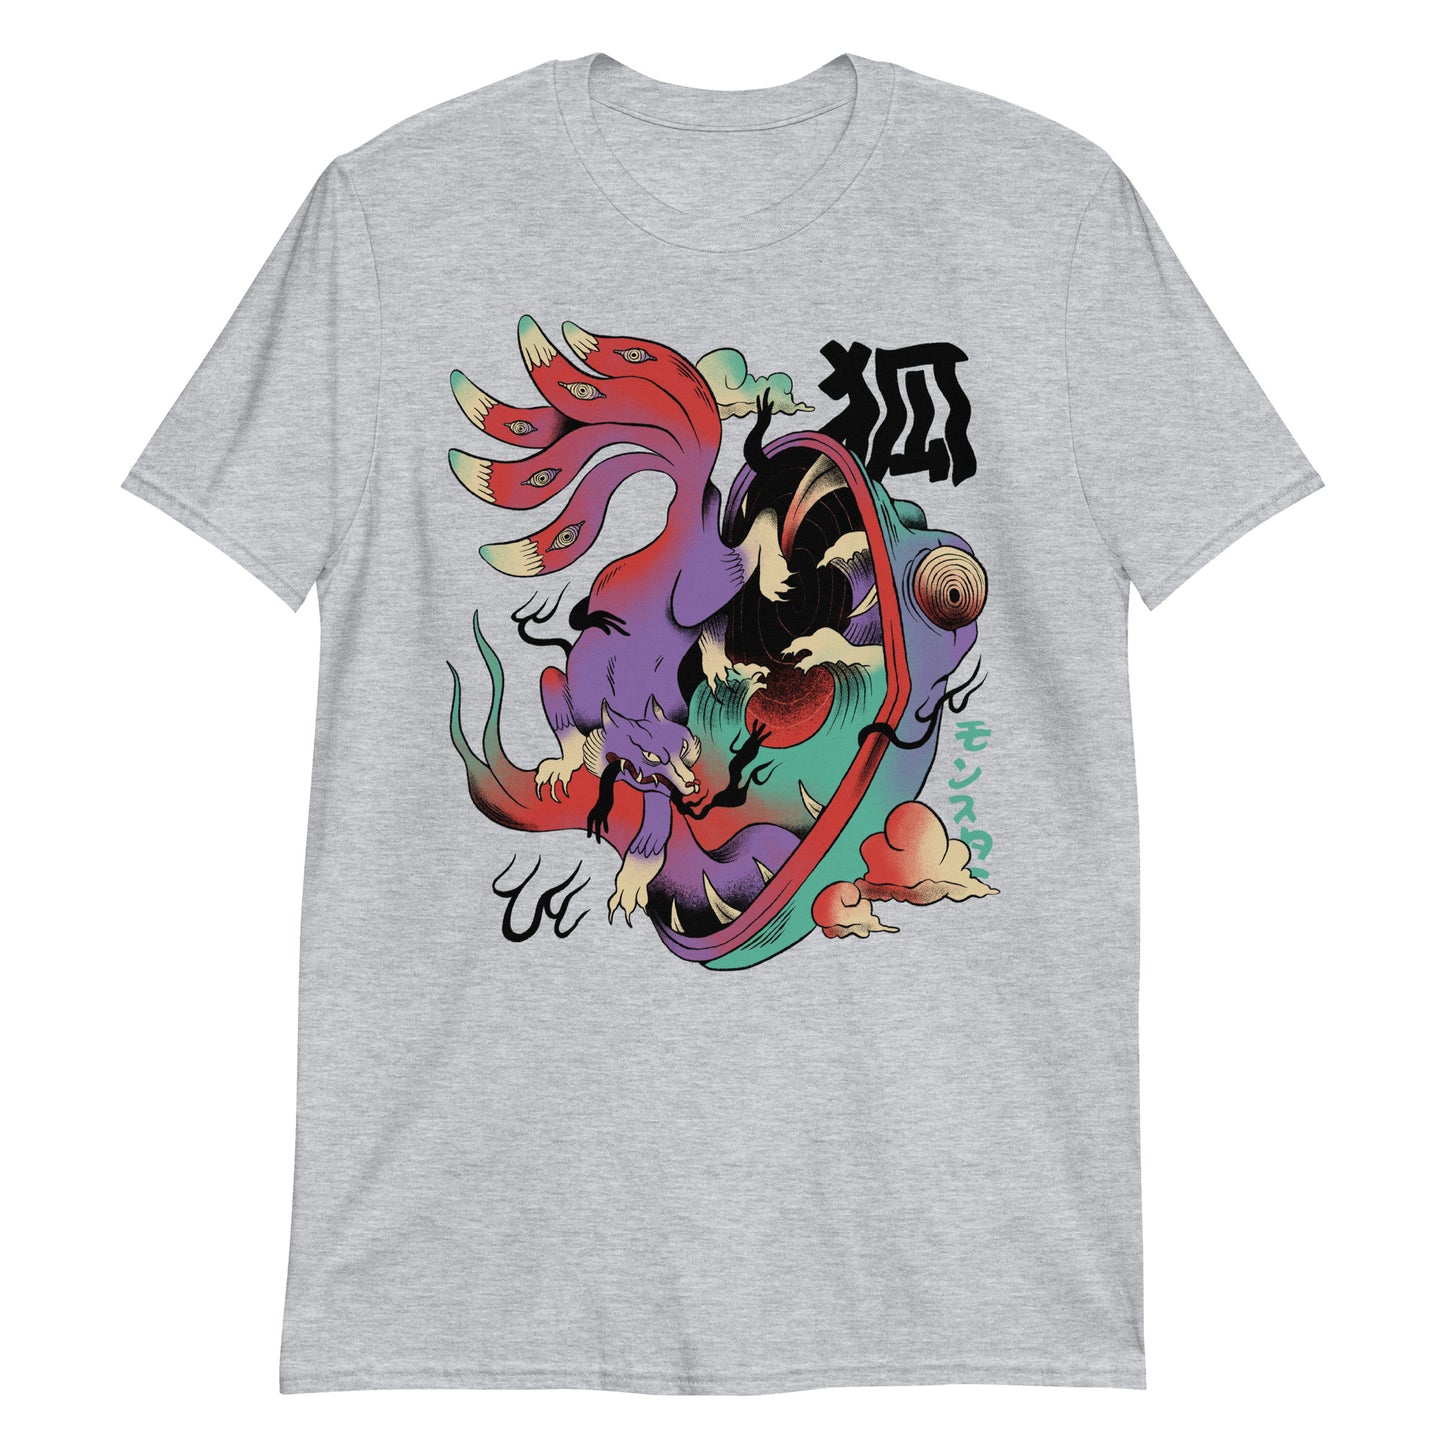 Psychedelic Japanese Aesthetic Art T-Shirt